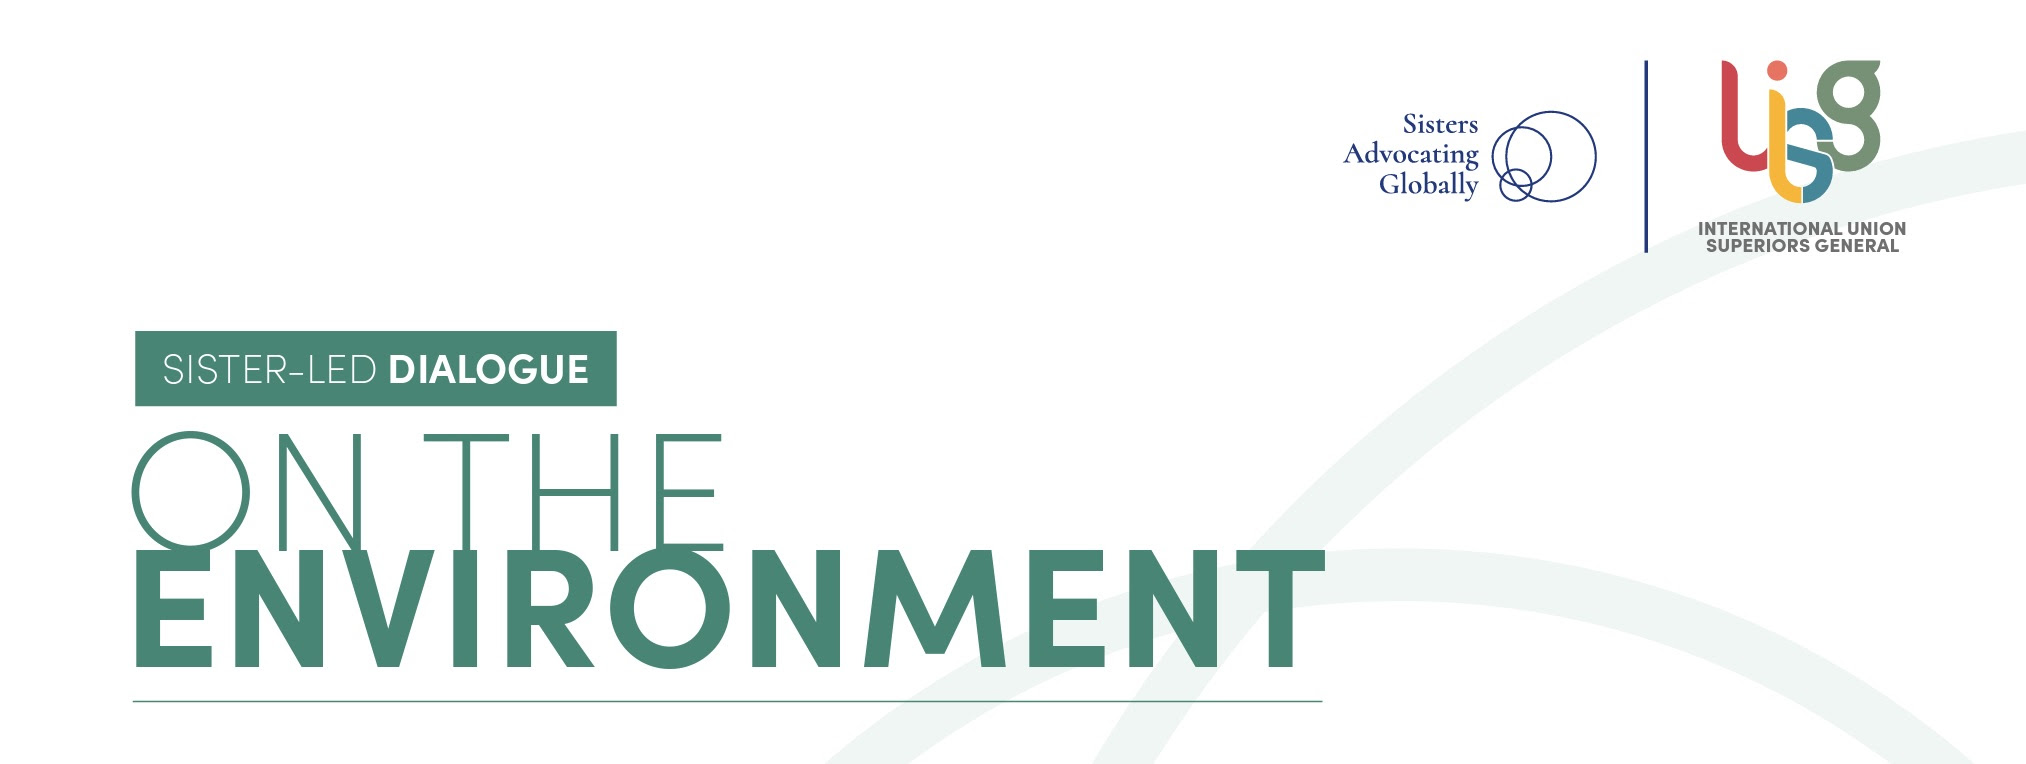 Header image for UISG policy brief reads "Sister-Led Dialogue On the Environment" 